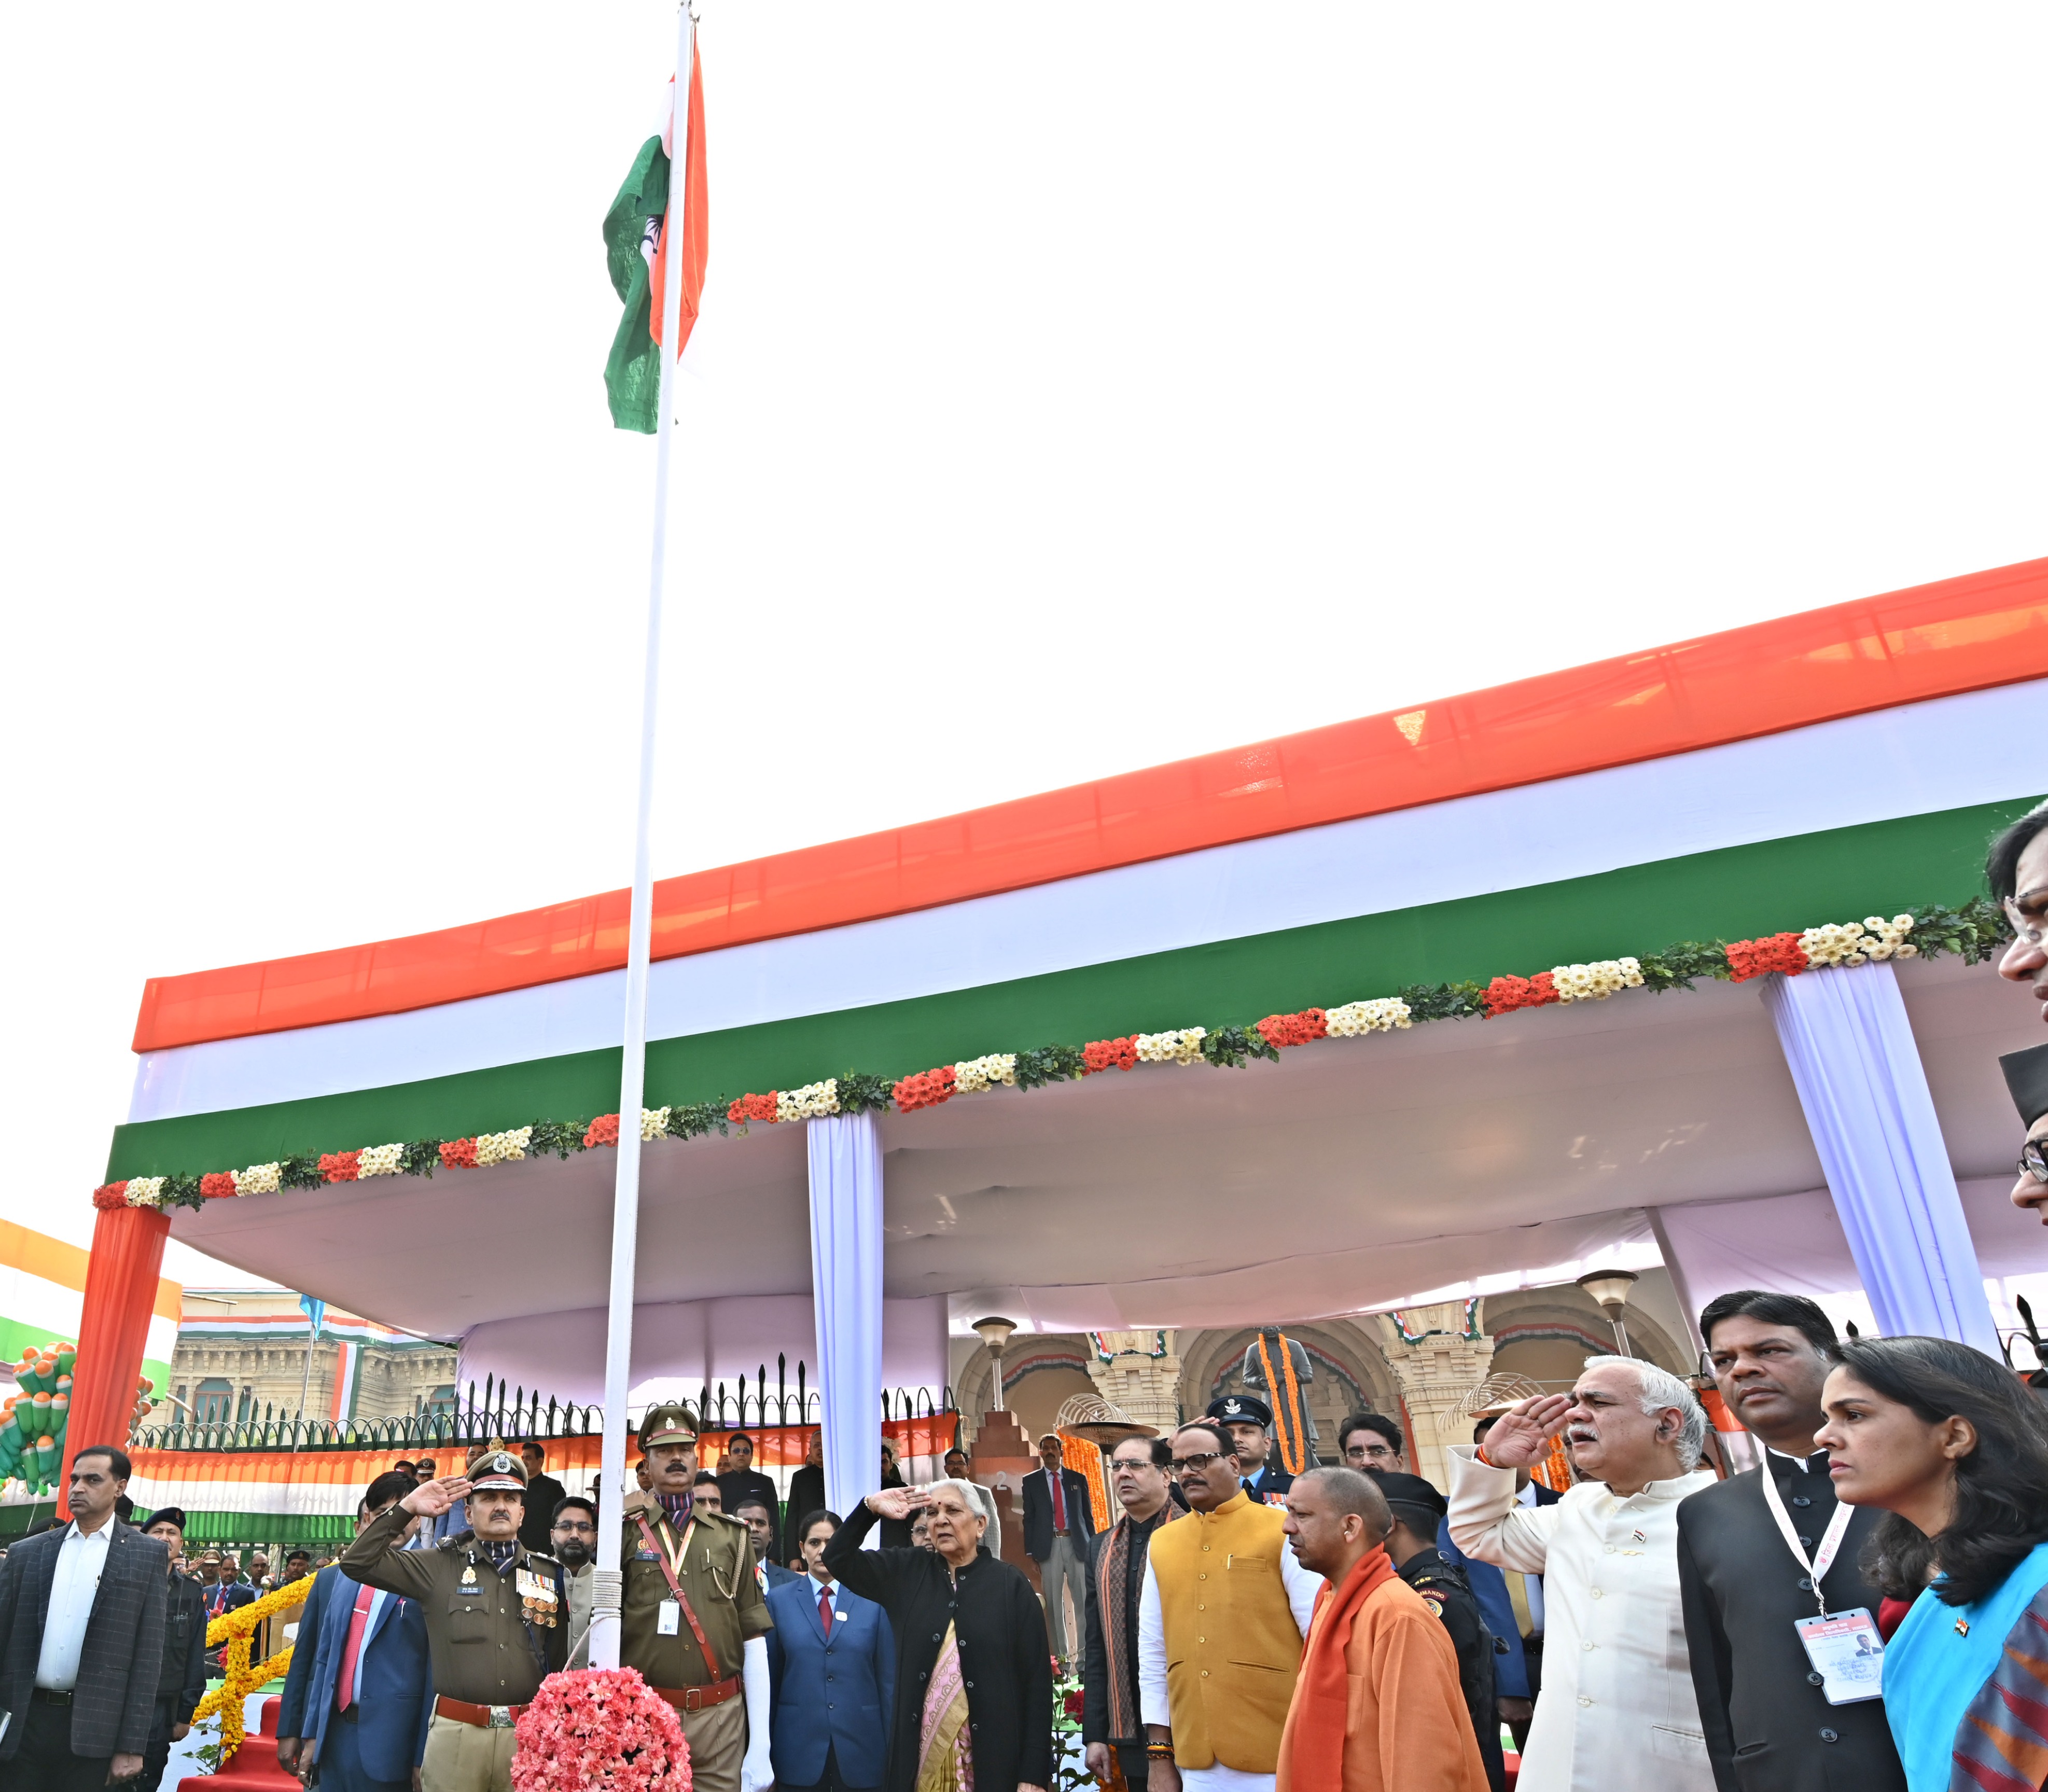 Honble Governor unfurled the national flag at Raj Bhawan on the occasion of Republic Day